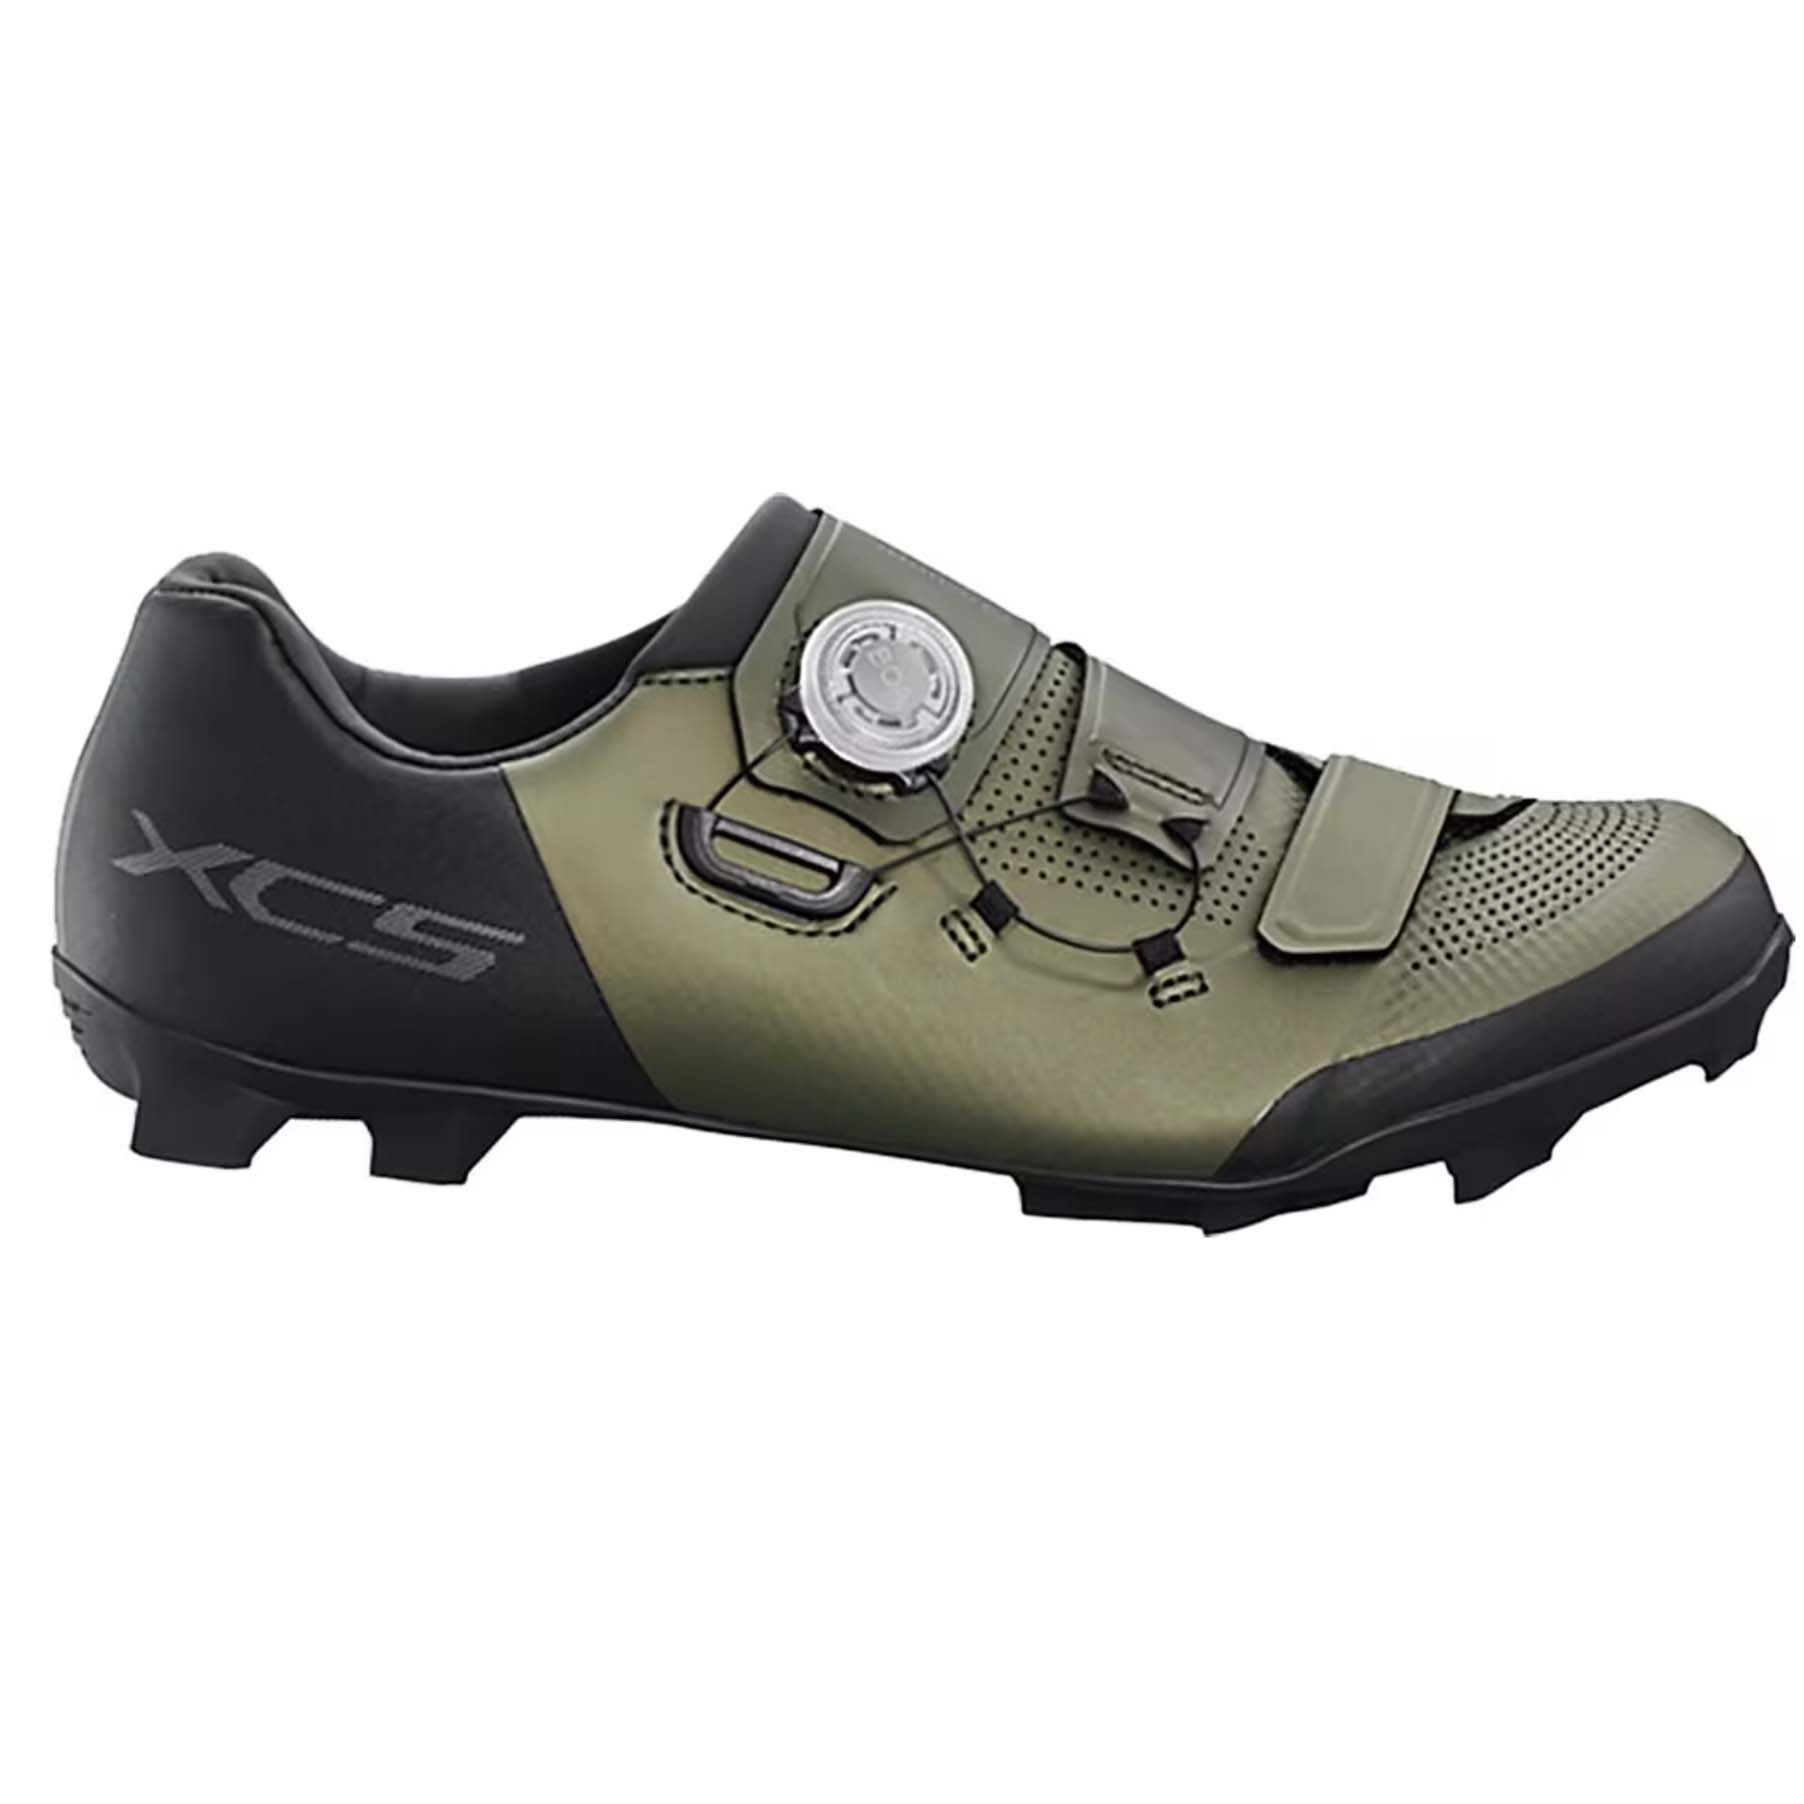 Shimano XC502 Wide Limited Edition Cycling Shoe in green